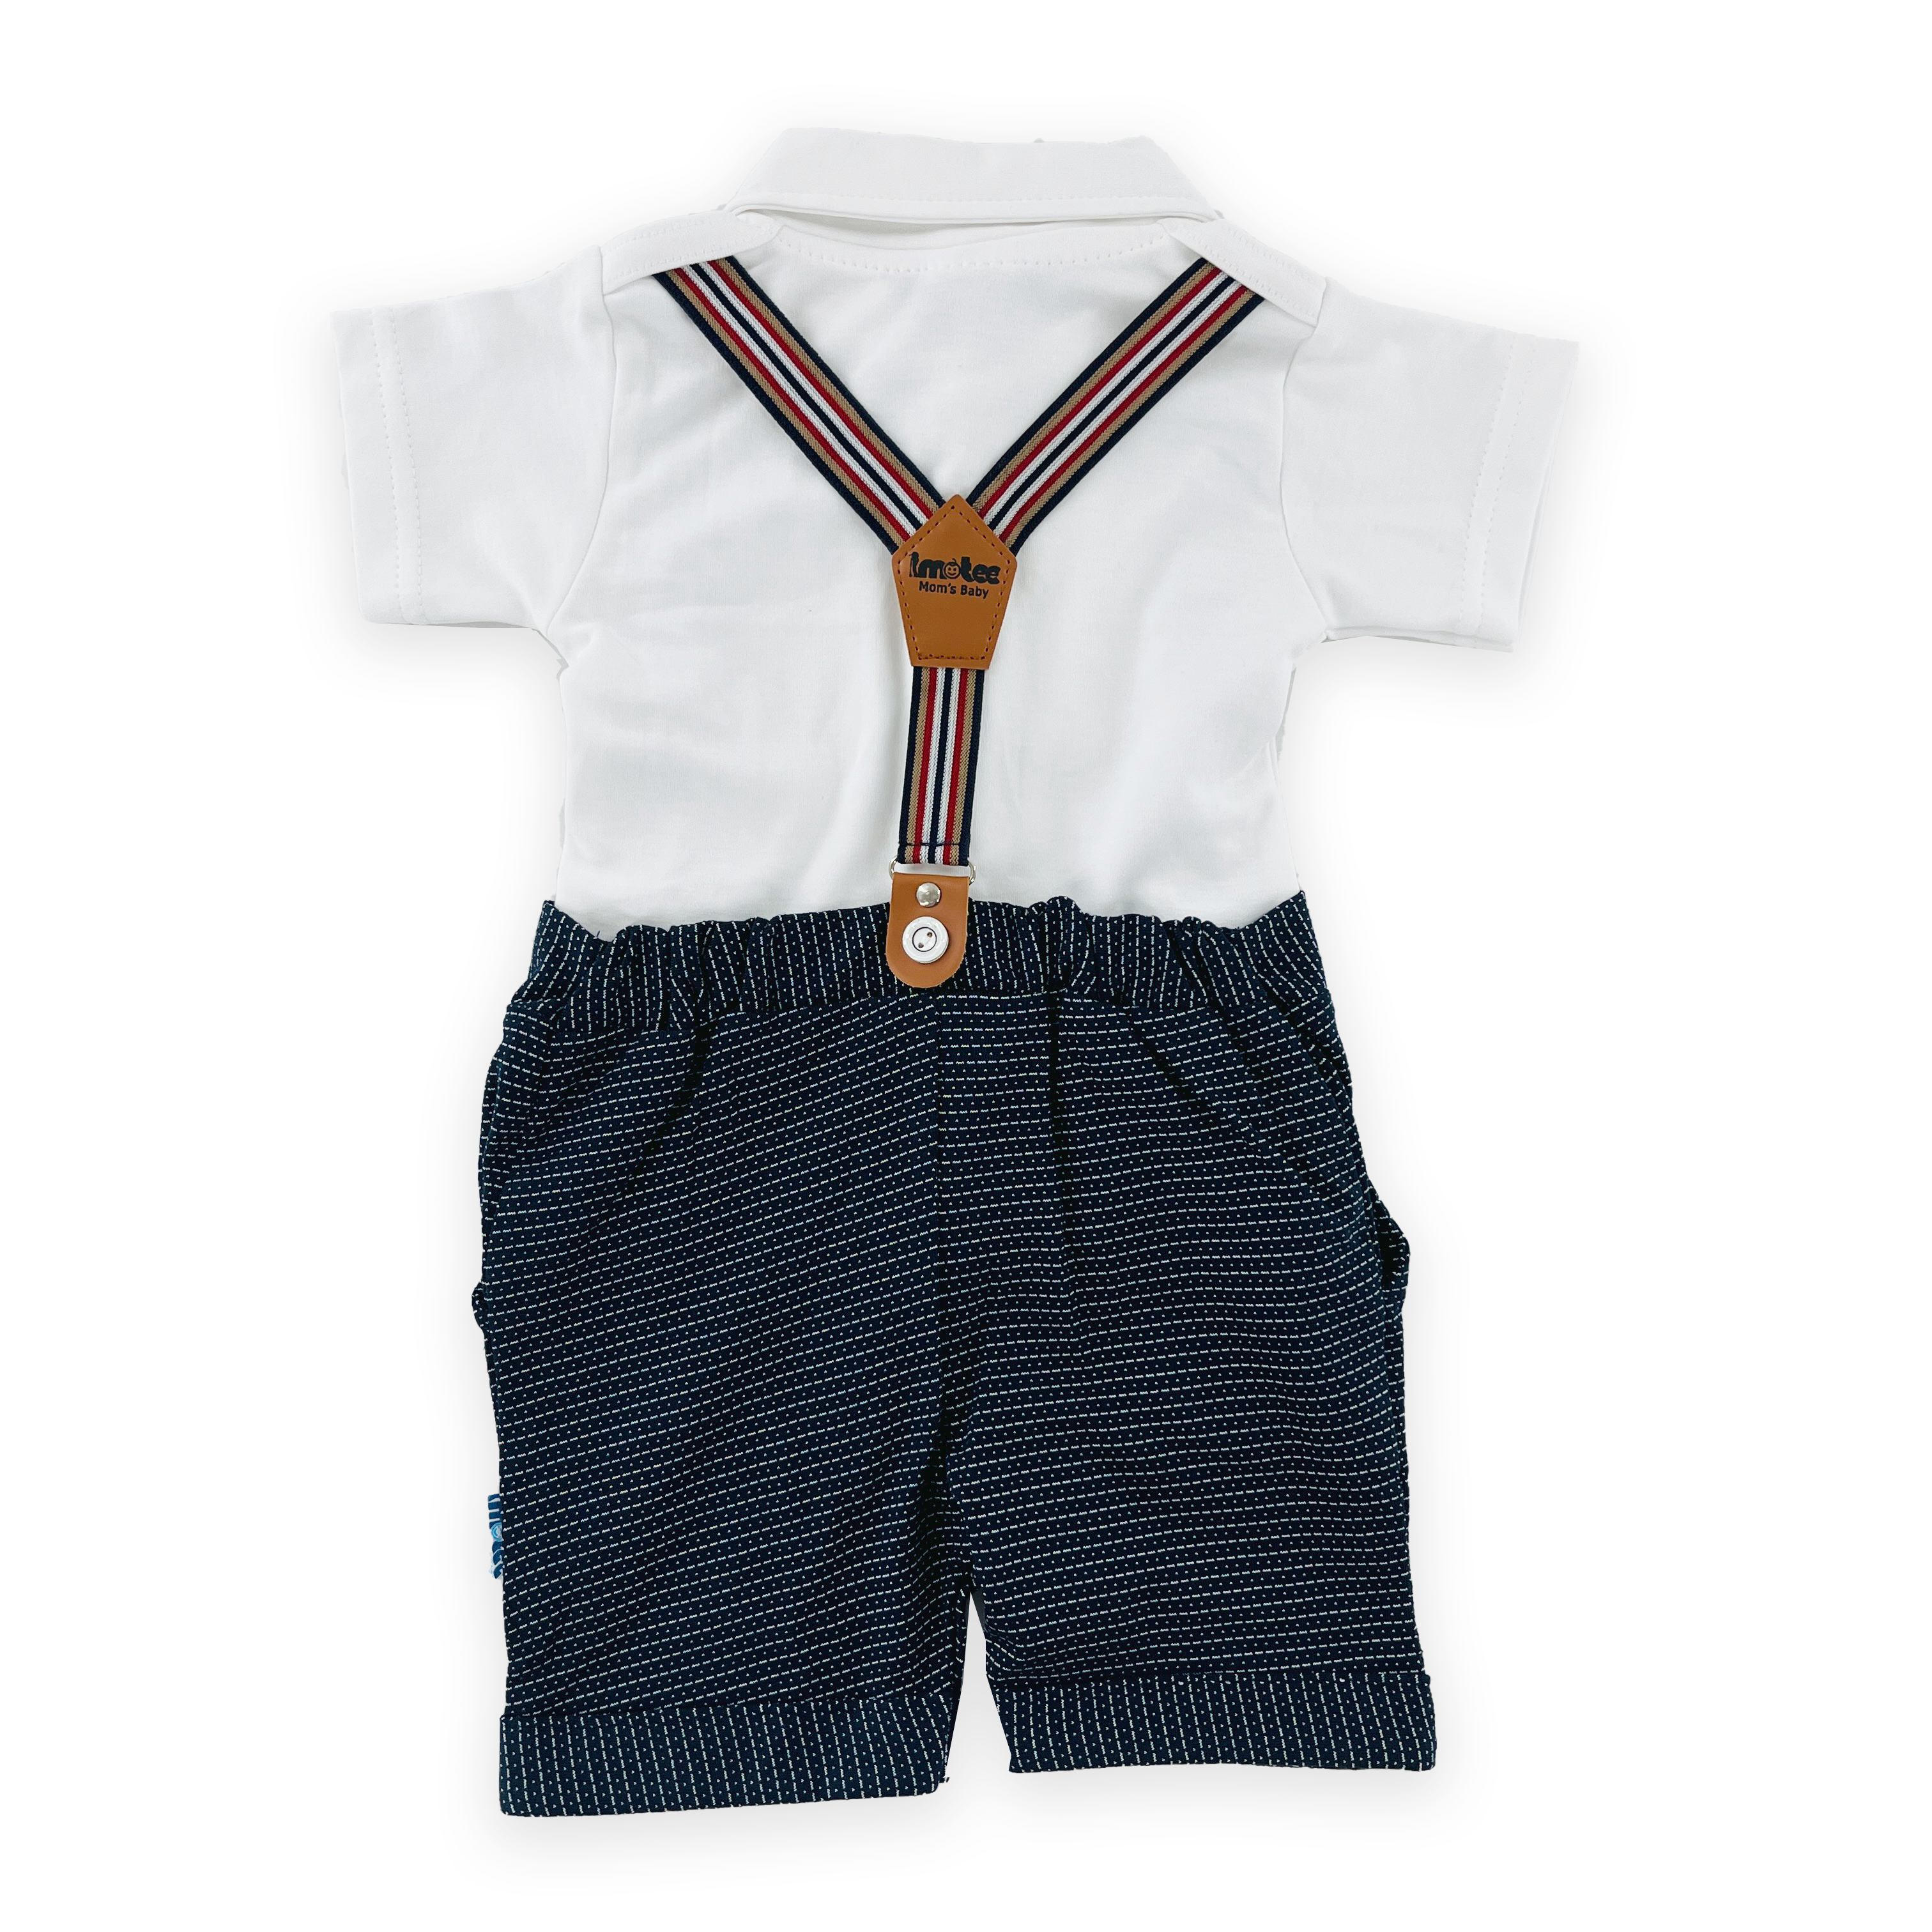 Toddler Kids Baby Boys Gentleman Bow Tie Shirt+Shorts Party Suit Outfit